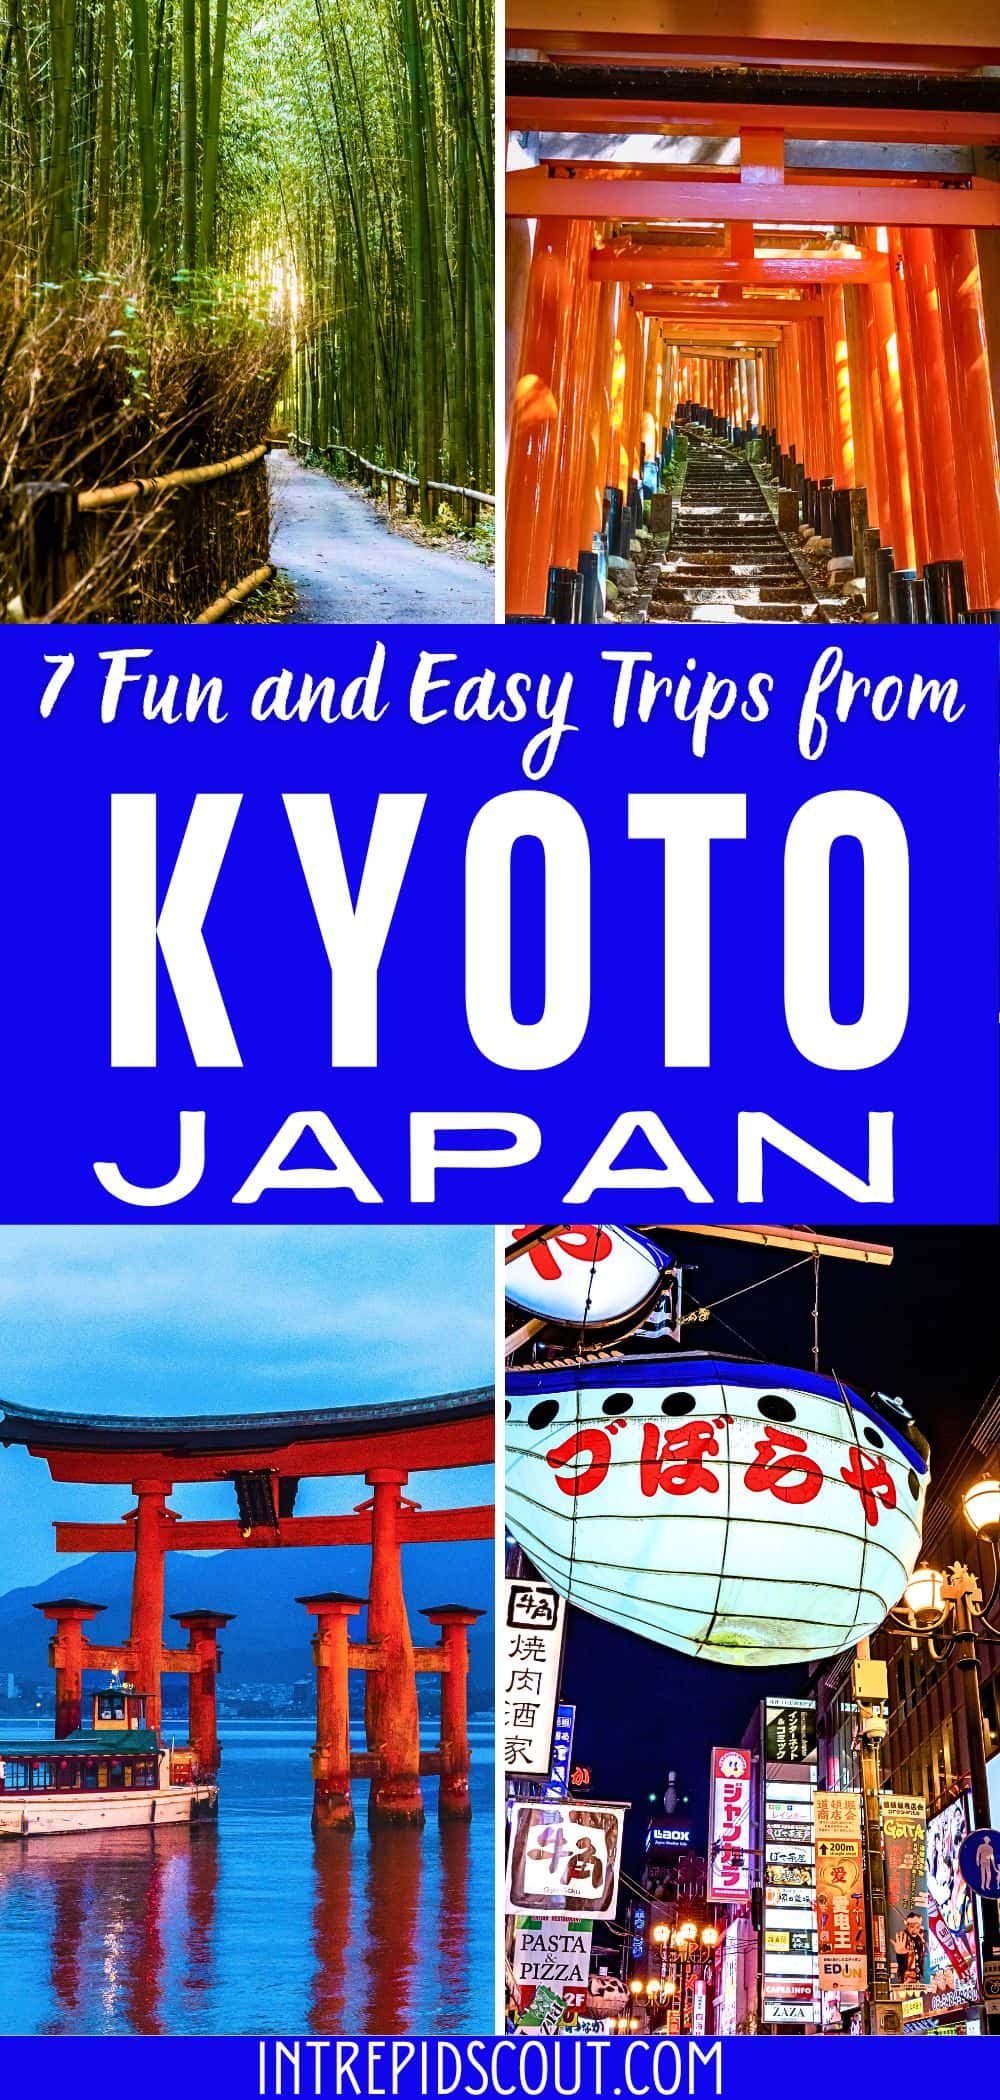 Day Trips form Kyoto